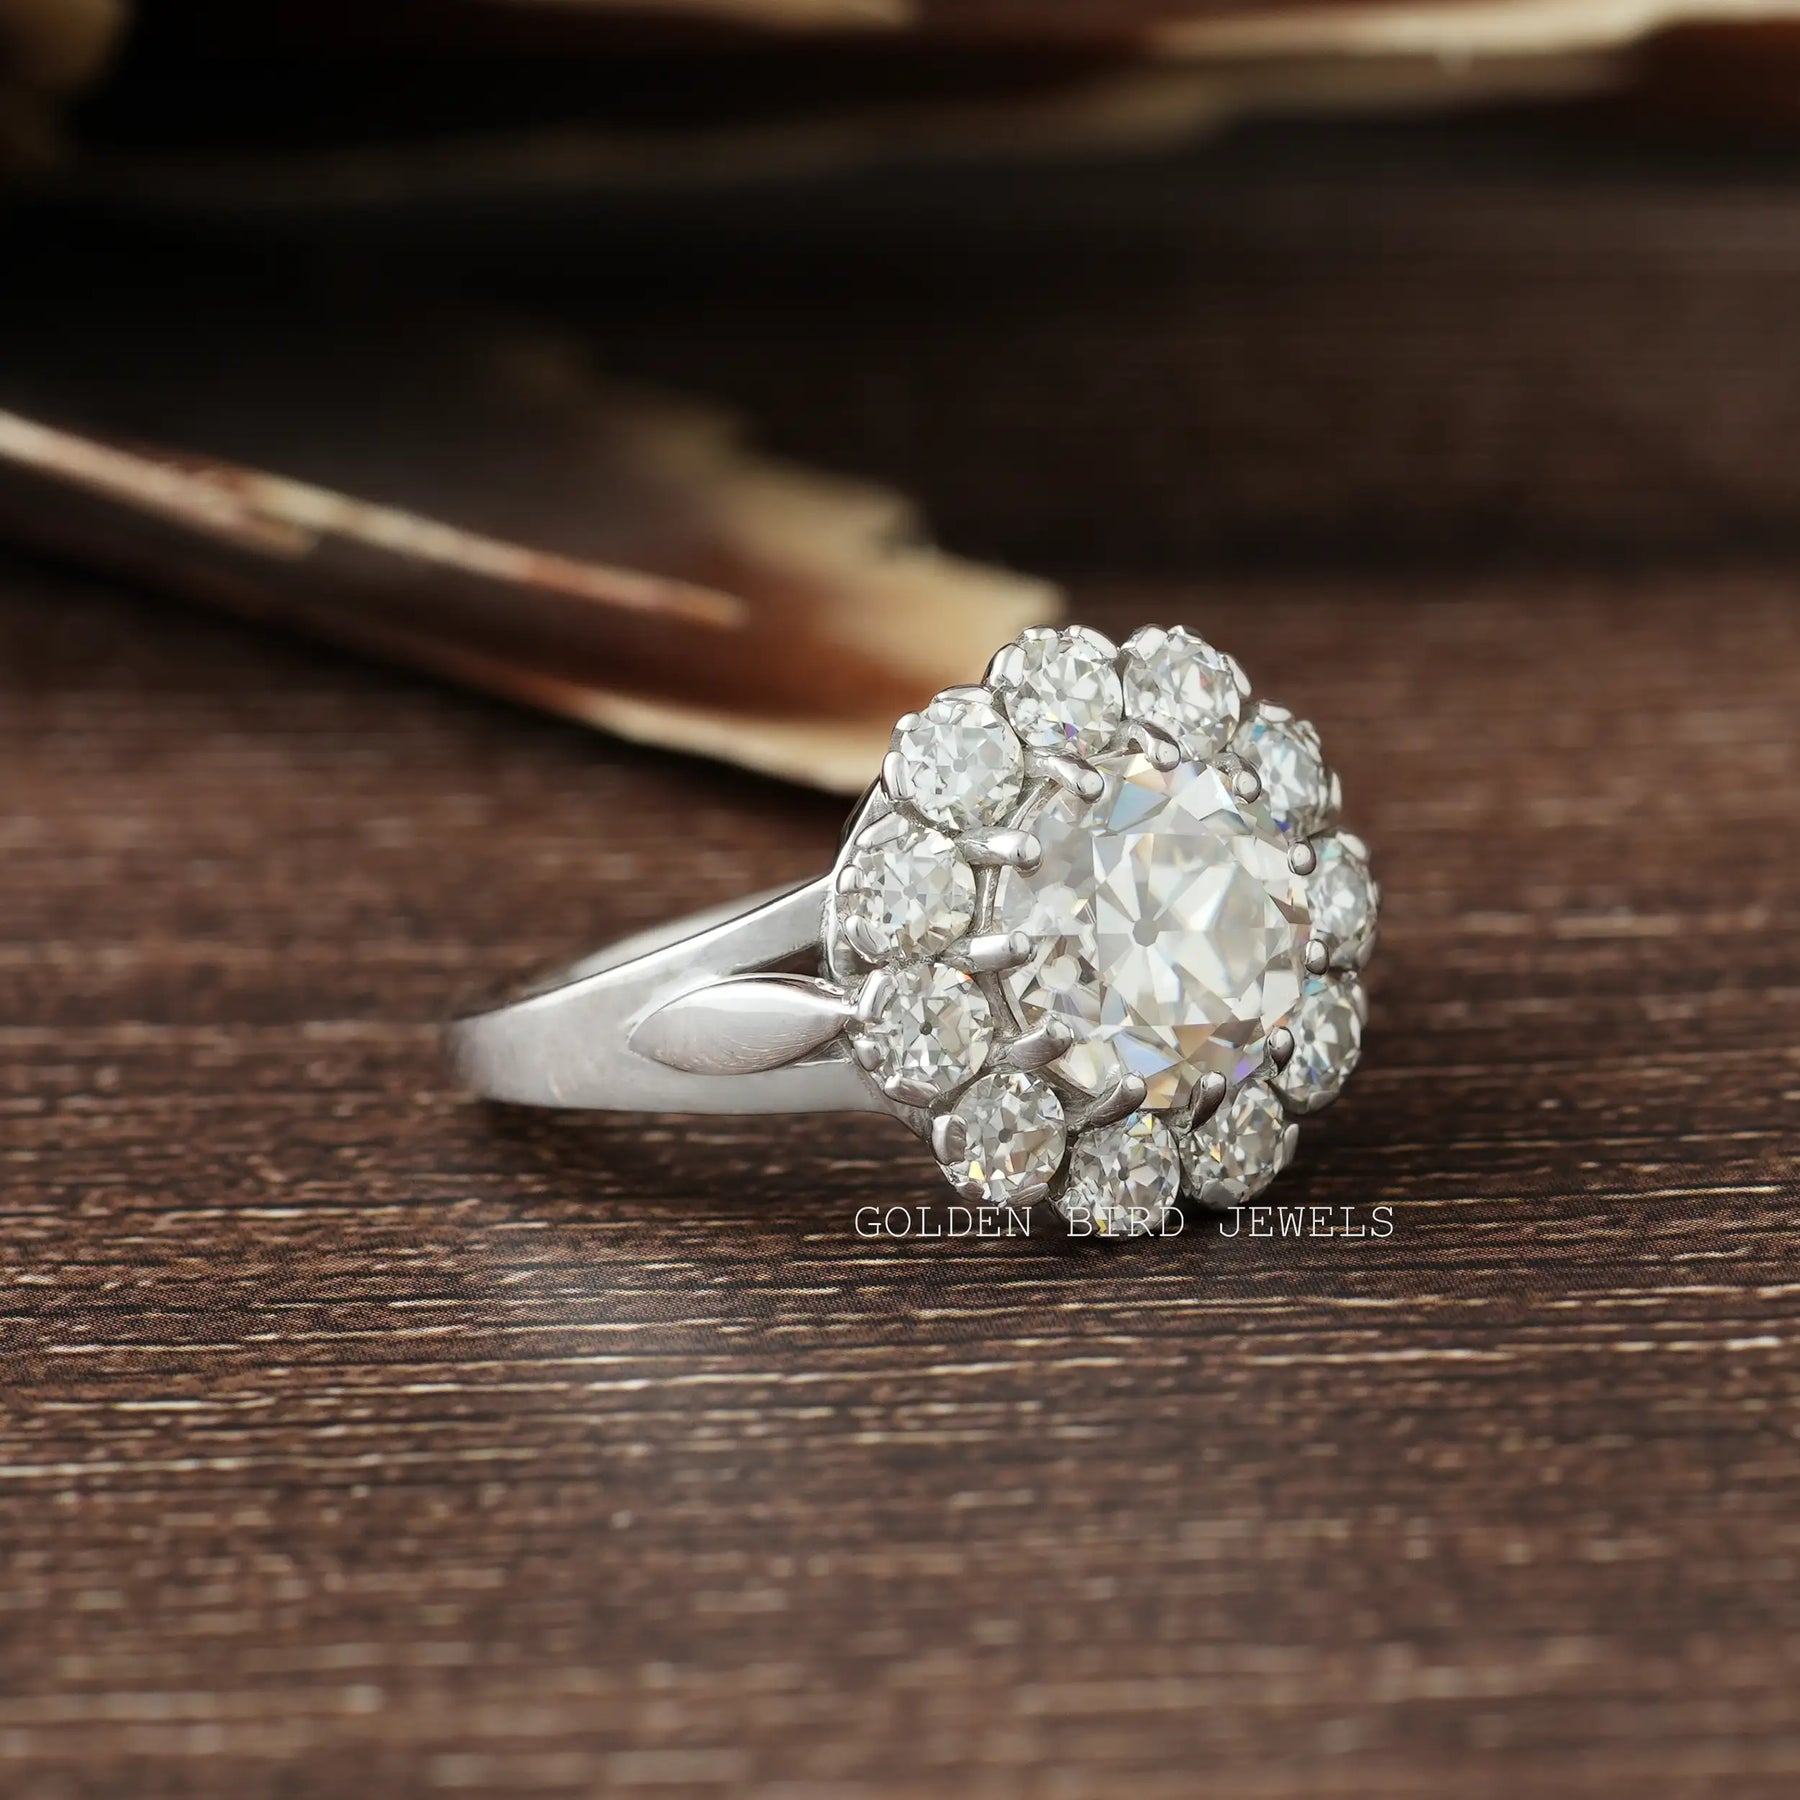 [Side view of round cut halo engagement ring made of 14k white gold]-[Golden Bird Jewels]